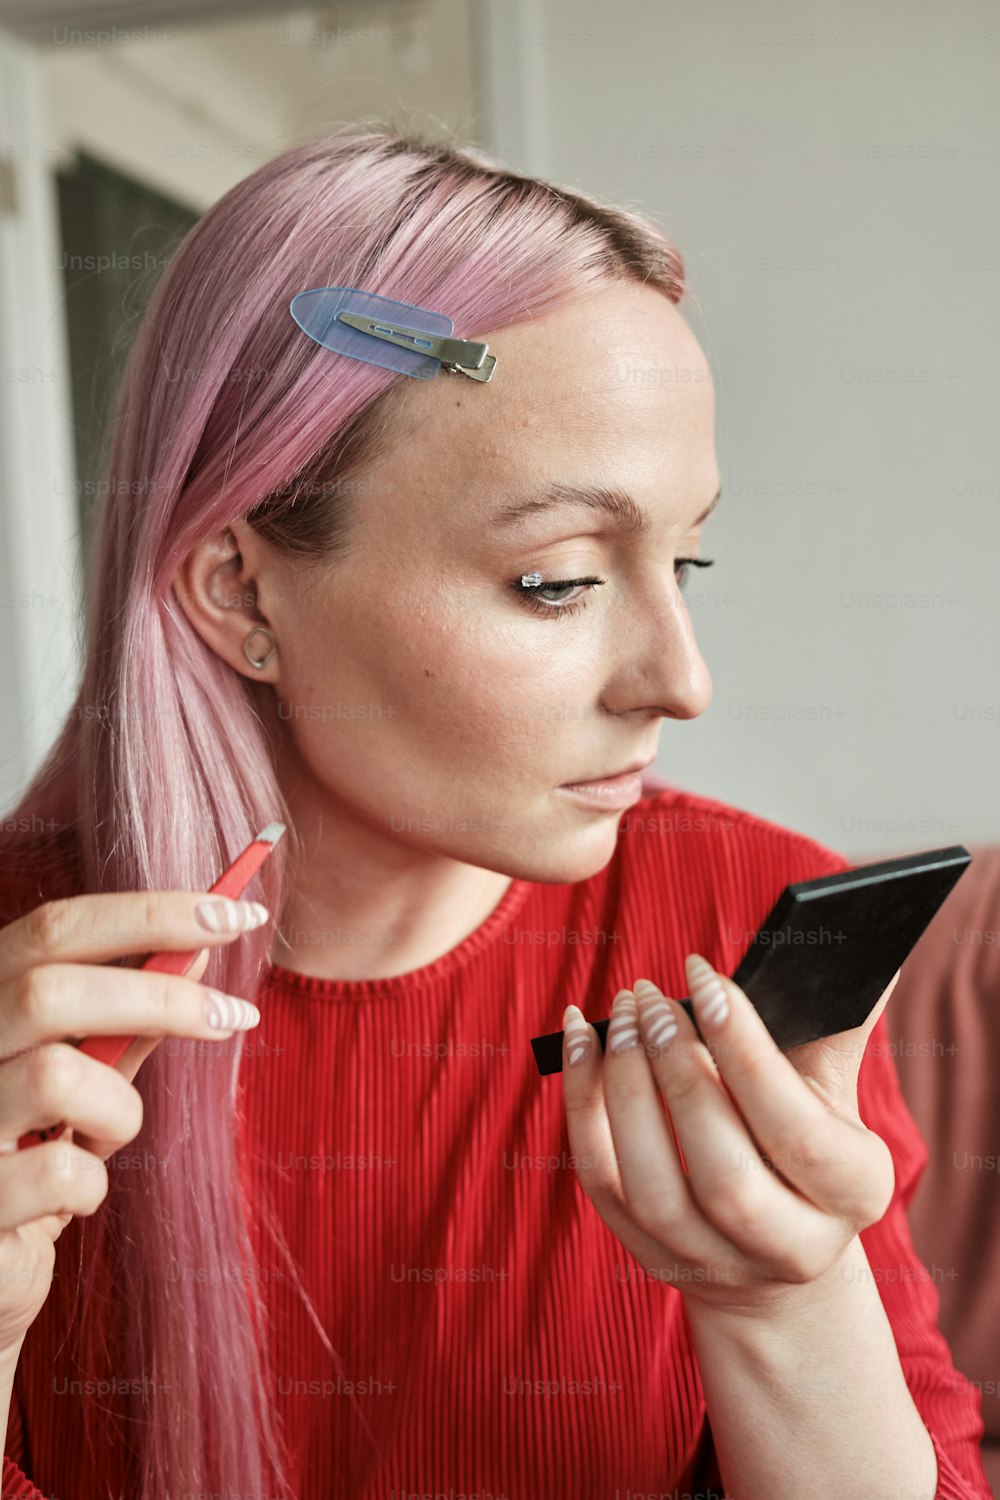 a woman with pink hair using a cell phone